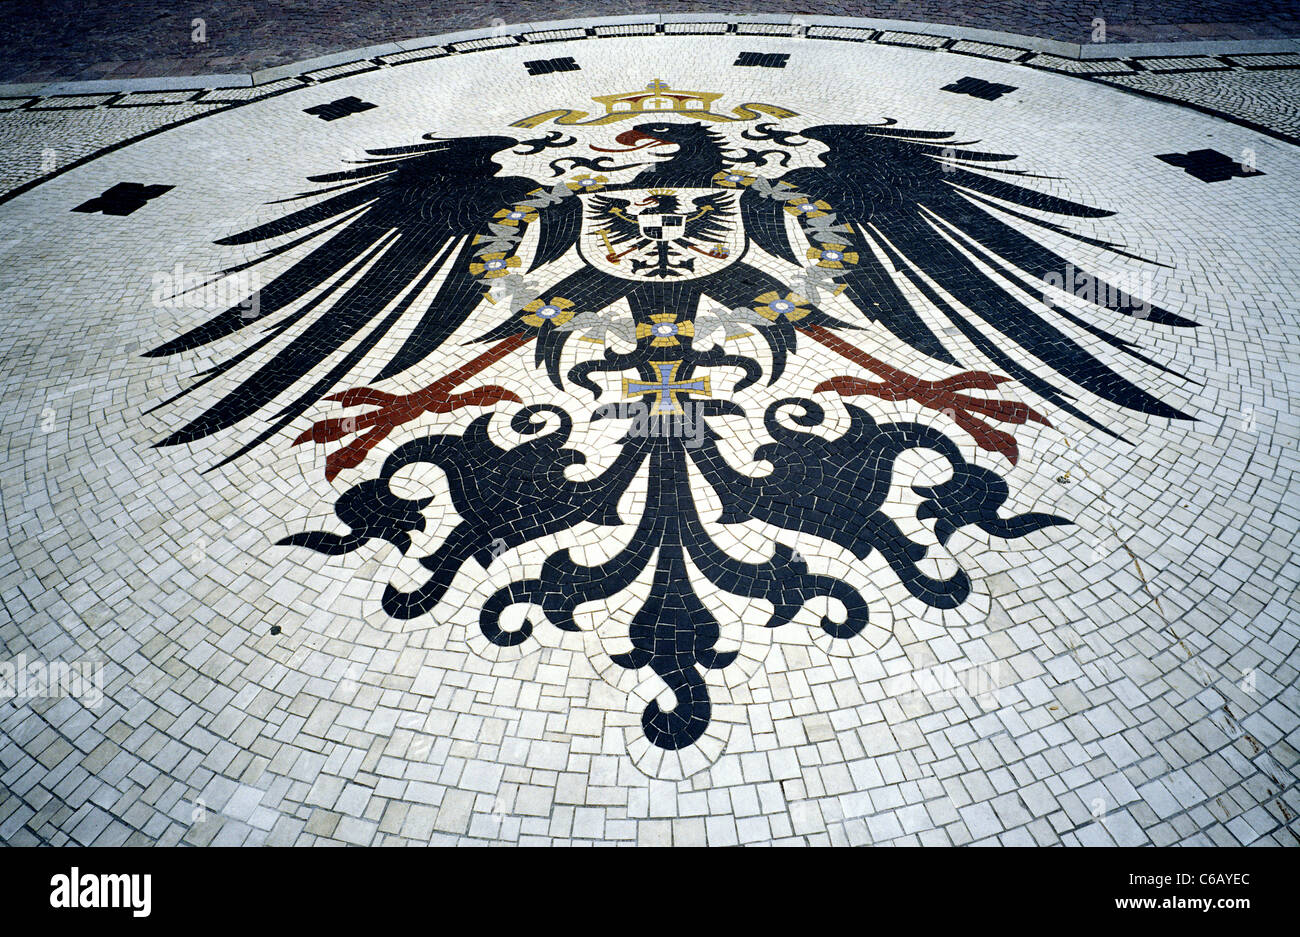 Mosaic depicting the Reichsadler (Imperial Eagle) in front of Neues Rathaus (New City Hall) at Schlossplatz in Wiesbaden. Stock Photo